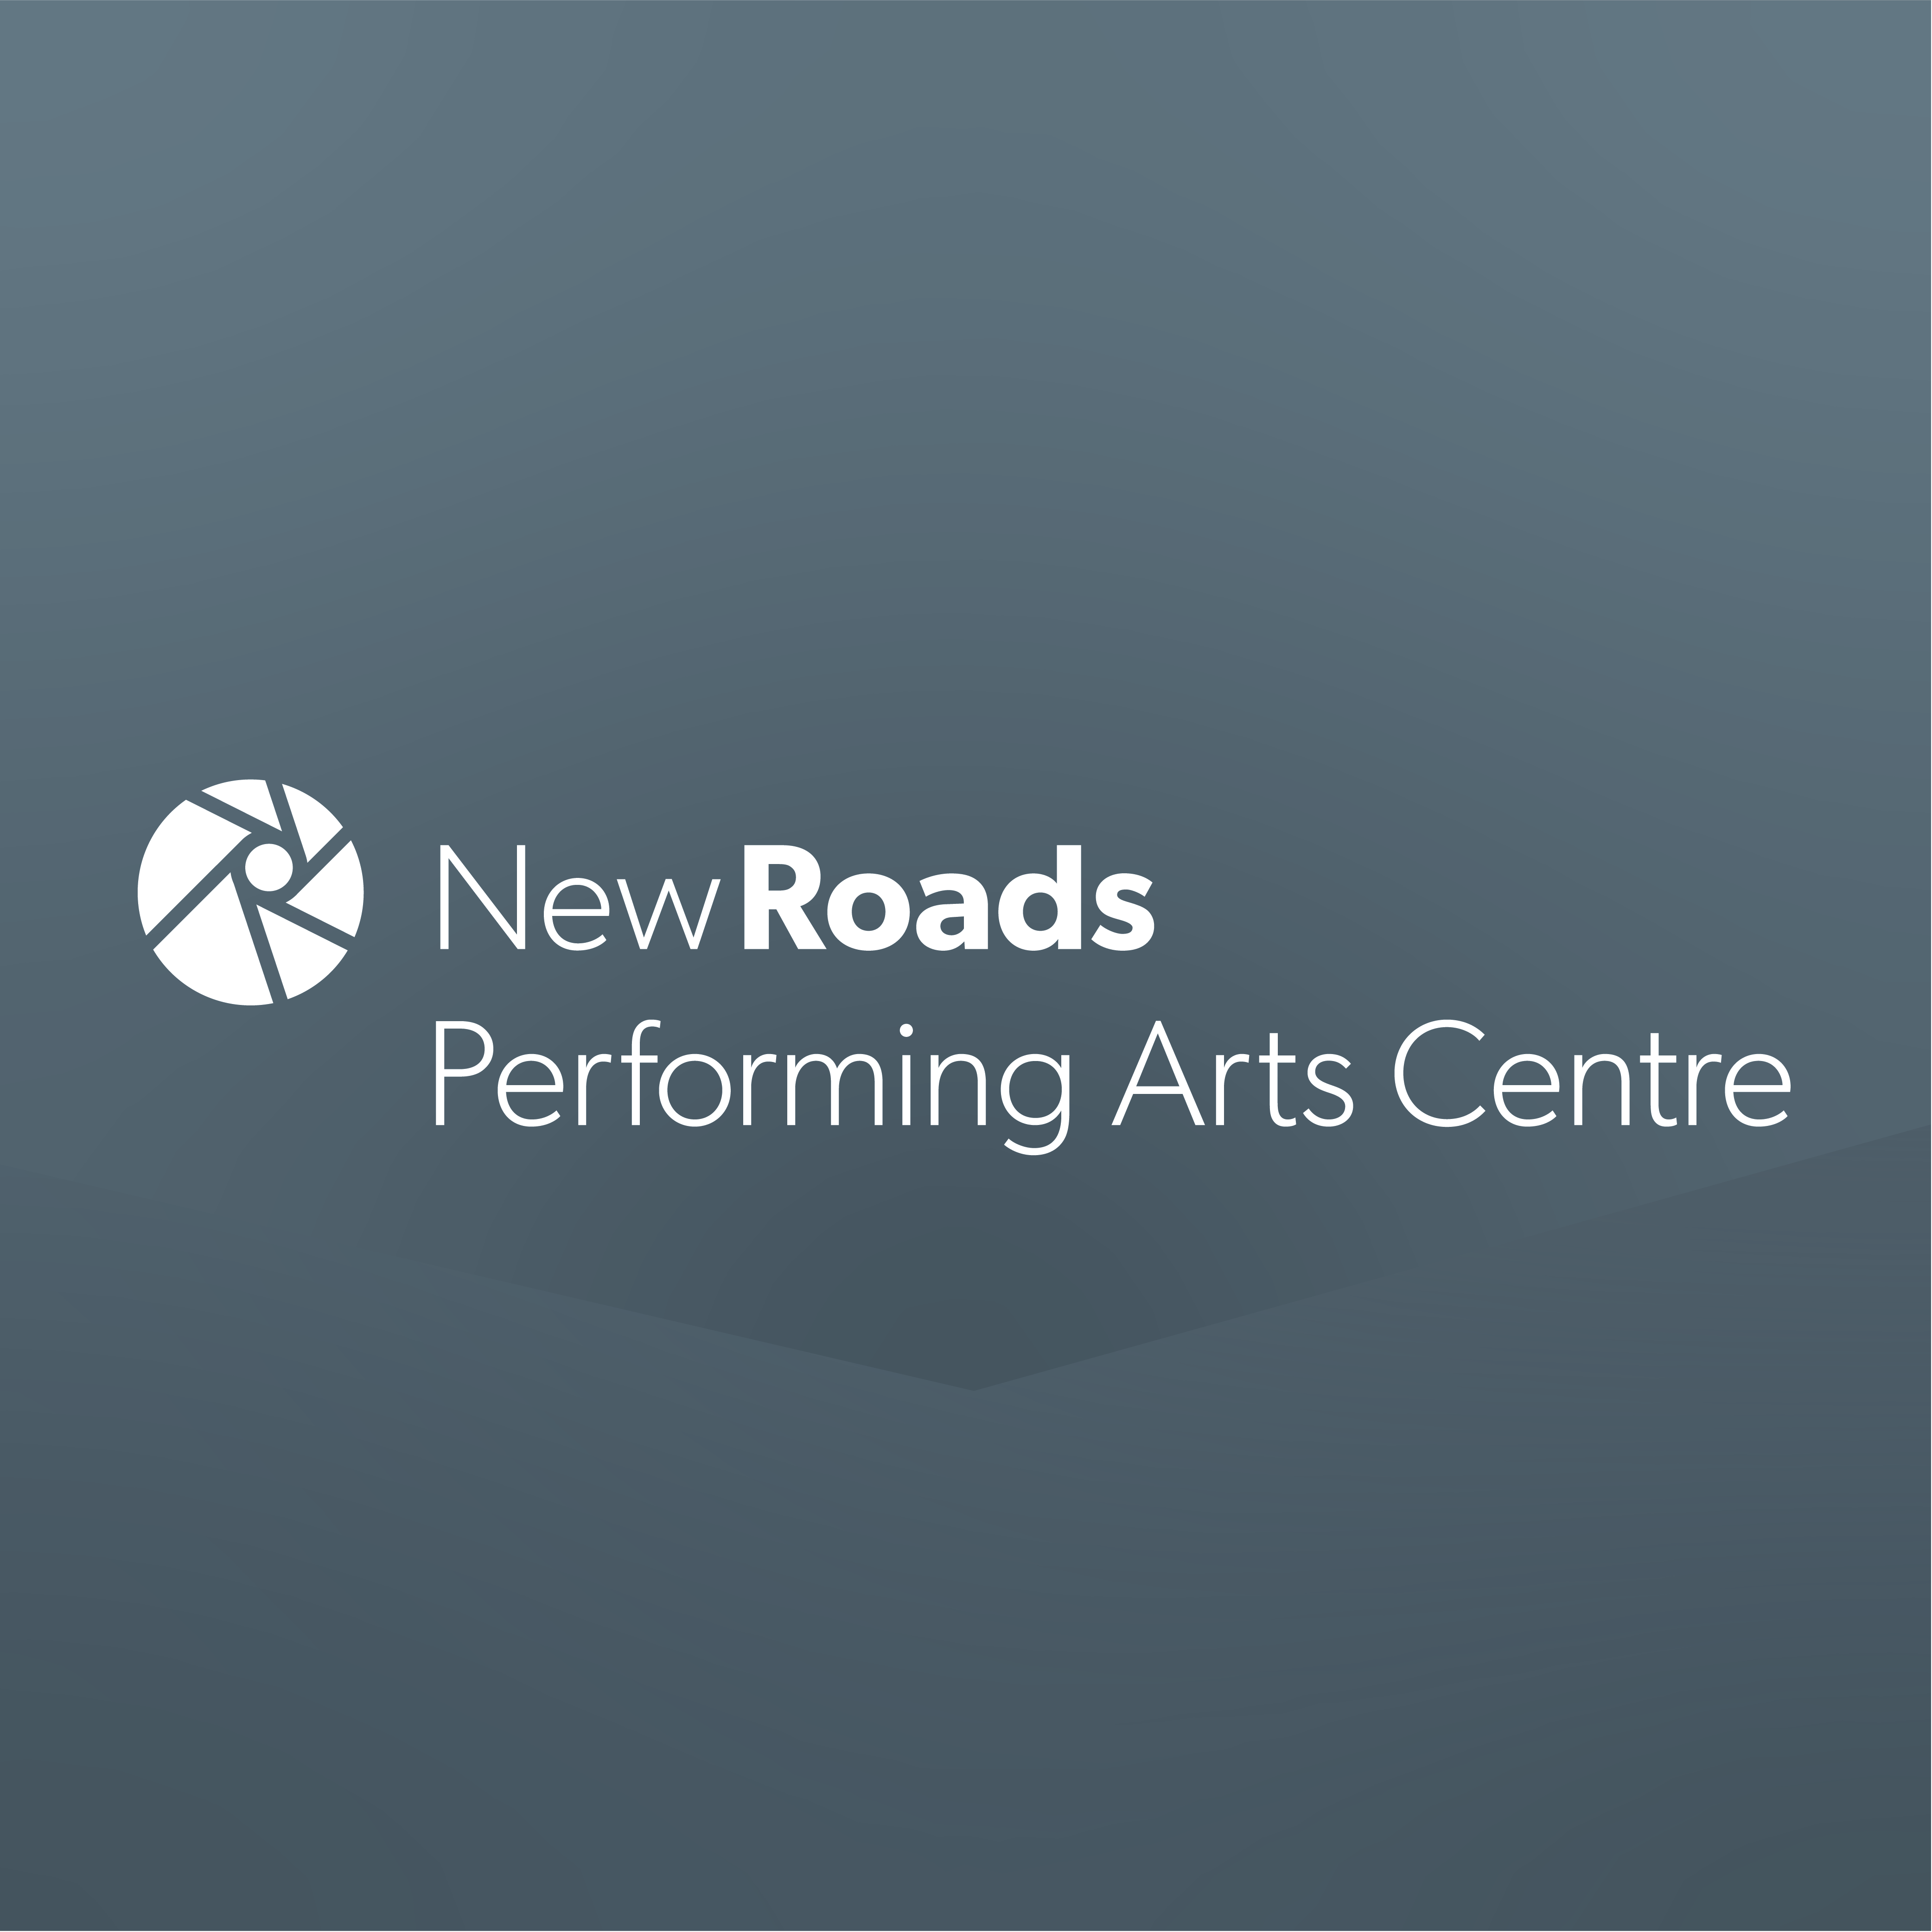 New Roads Performing Arts Centre